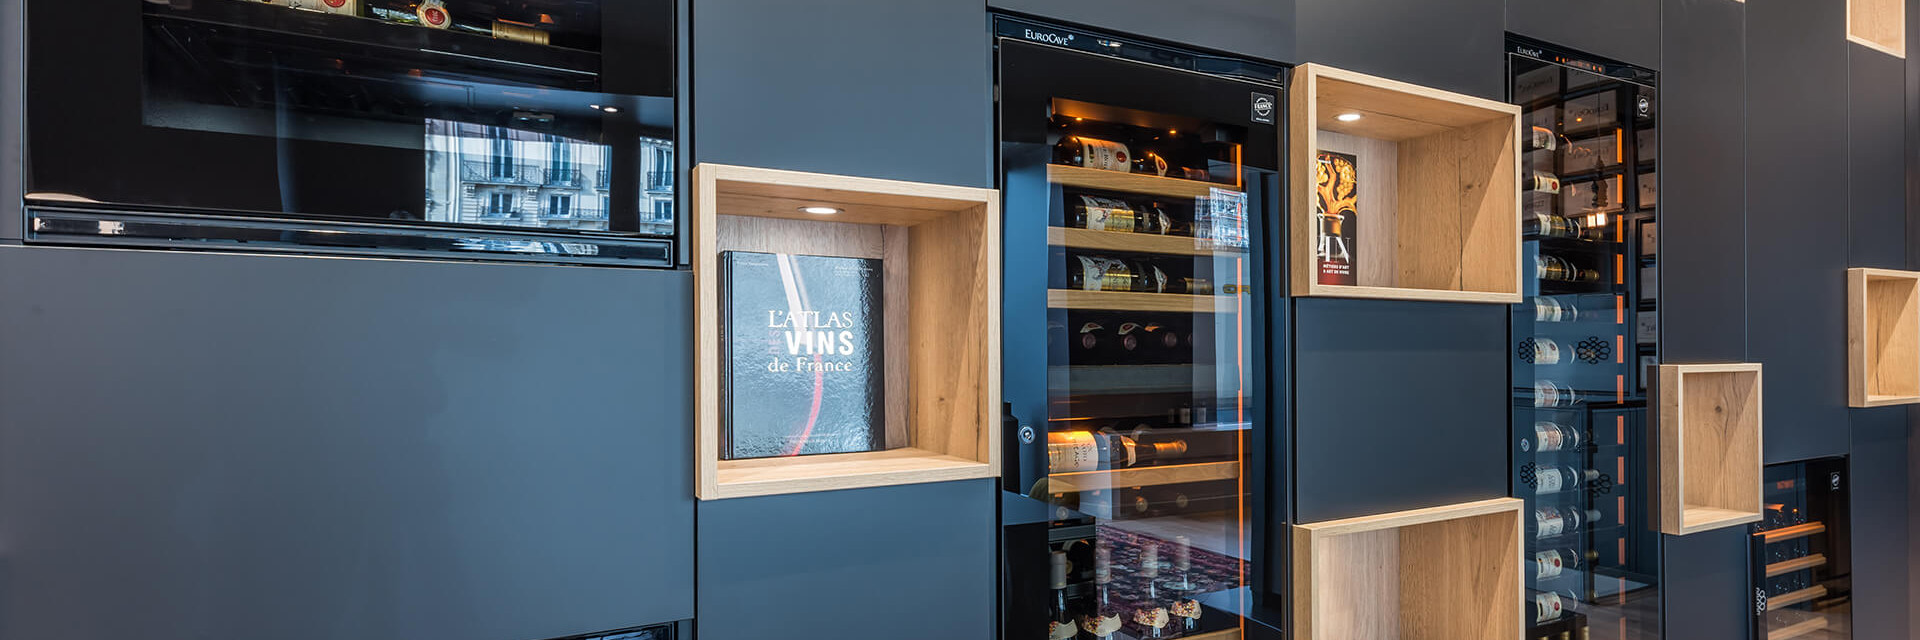 Purchase guide – How to choose the wine cabinet of your dreams? Usage, functions, size, capacity, door or design.